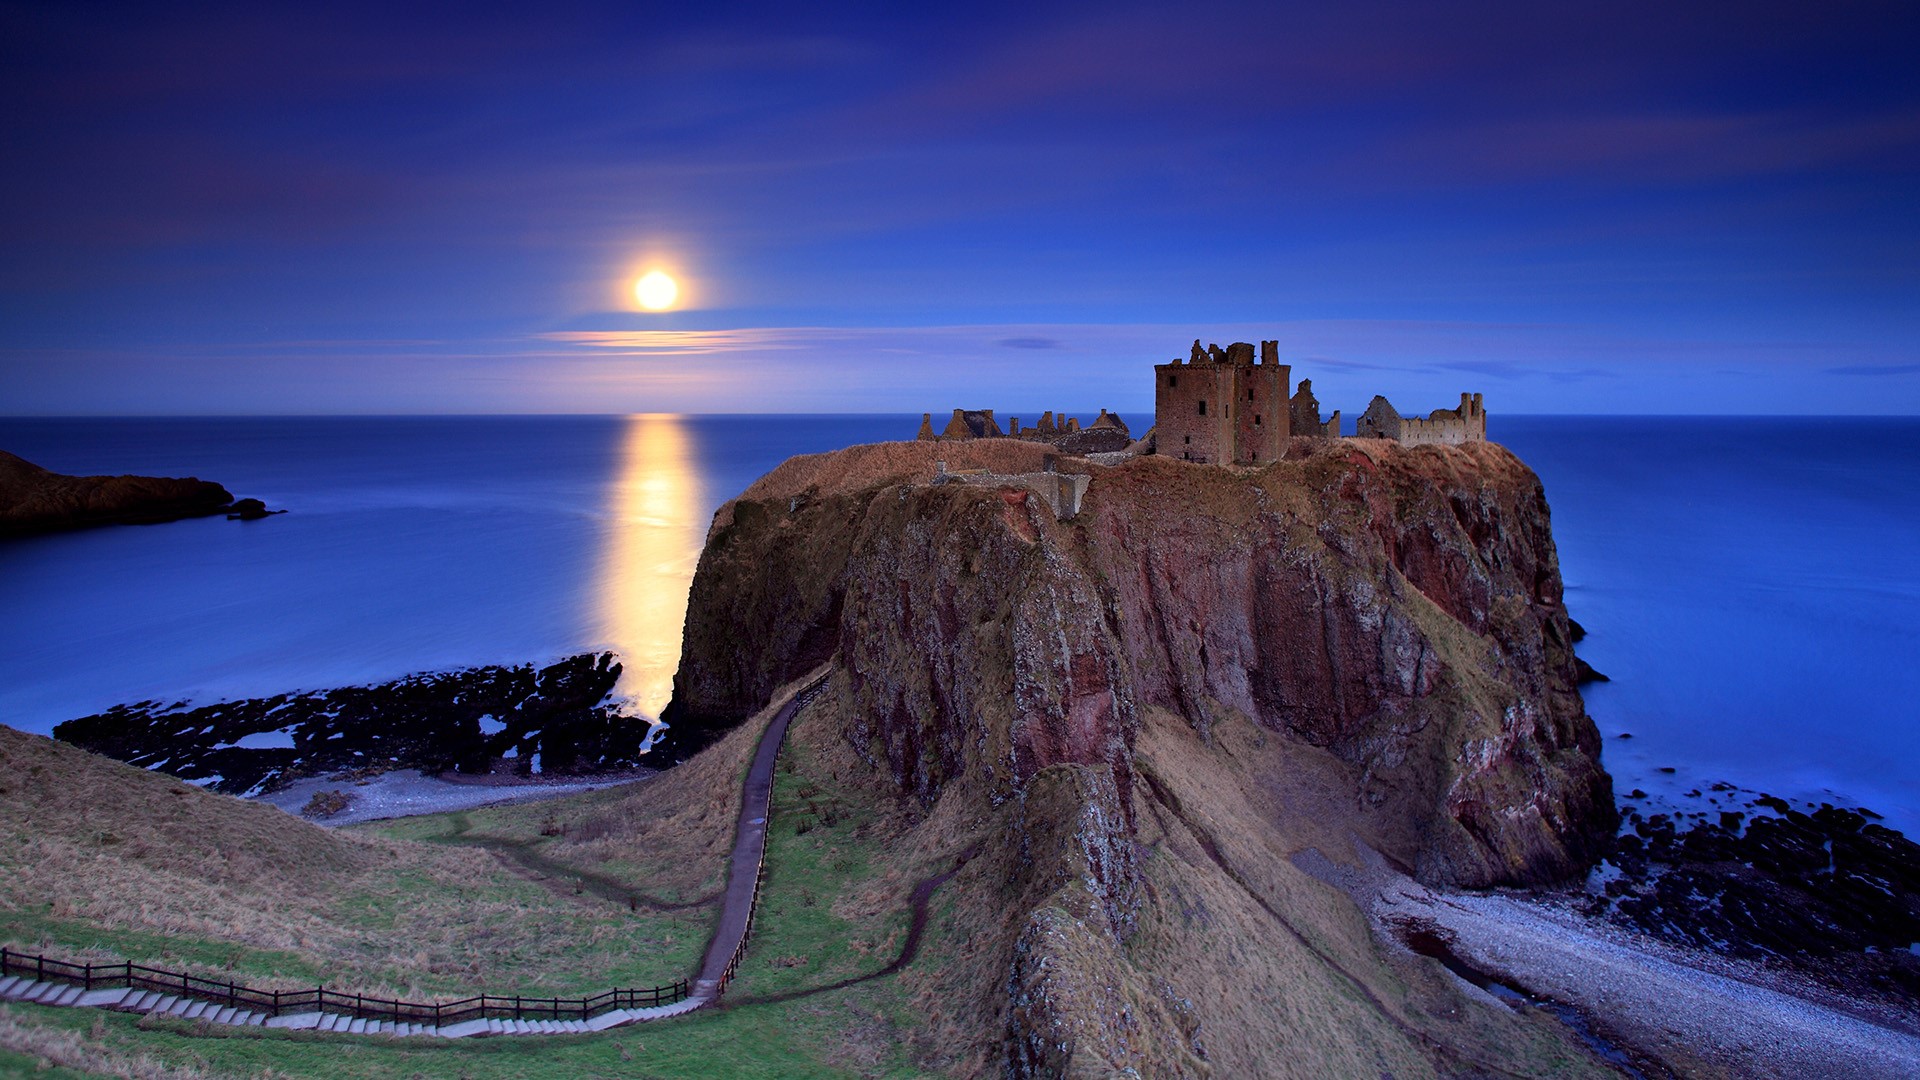 General 1920x1080 nature landscape island stairs castle ruins horizon clouds sky water sea moonlight Moon Scotland